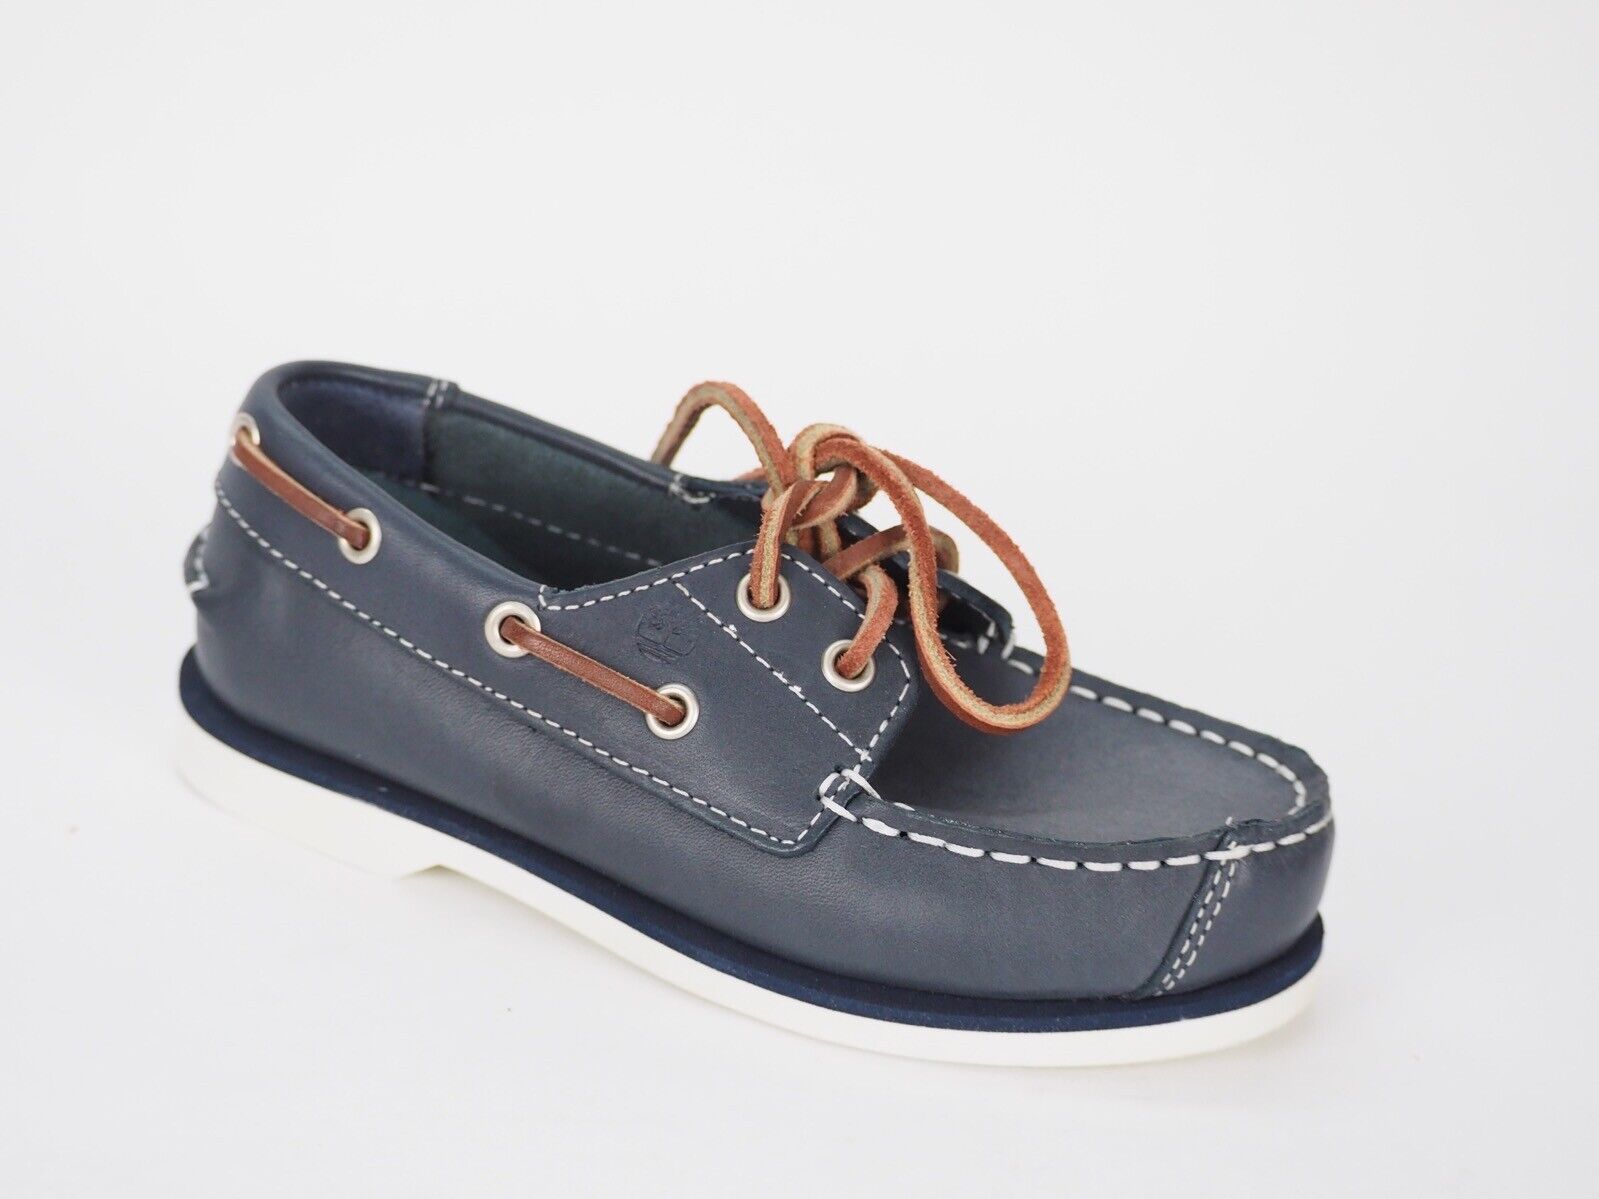 Boys Timberland Classic 85838 Blue Leather 2 Eye Lace Up Casual Kids Boat Shoes